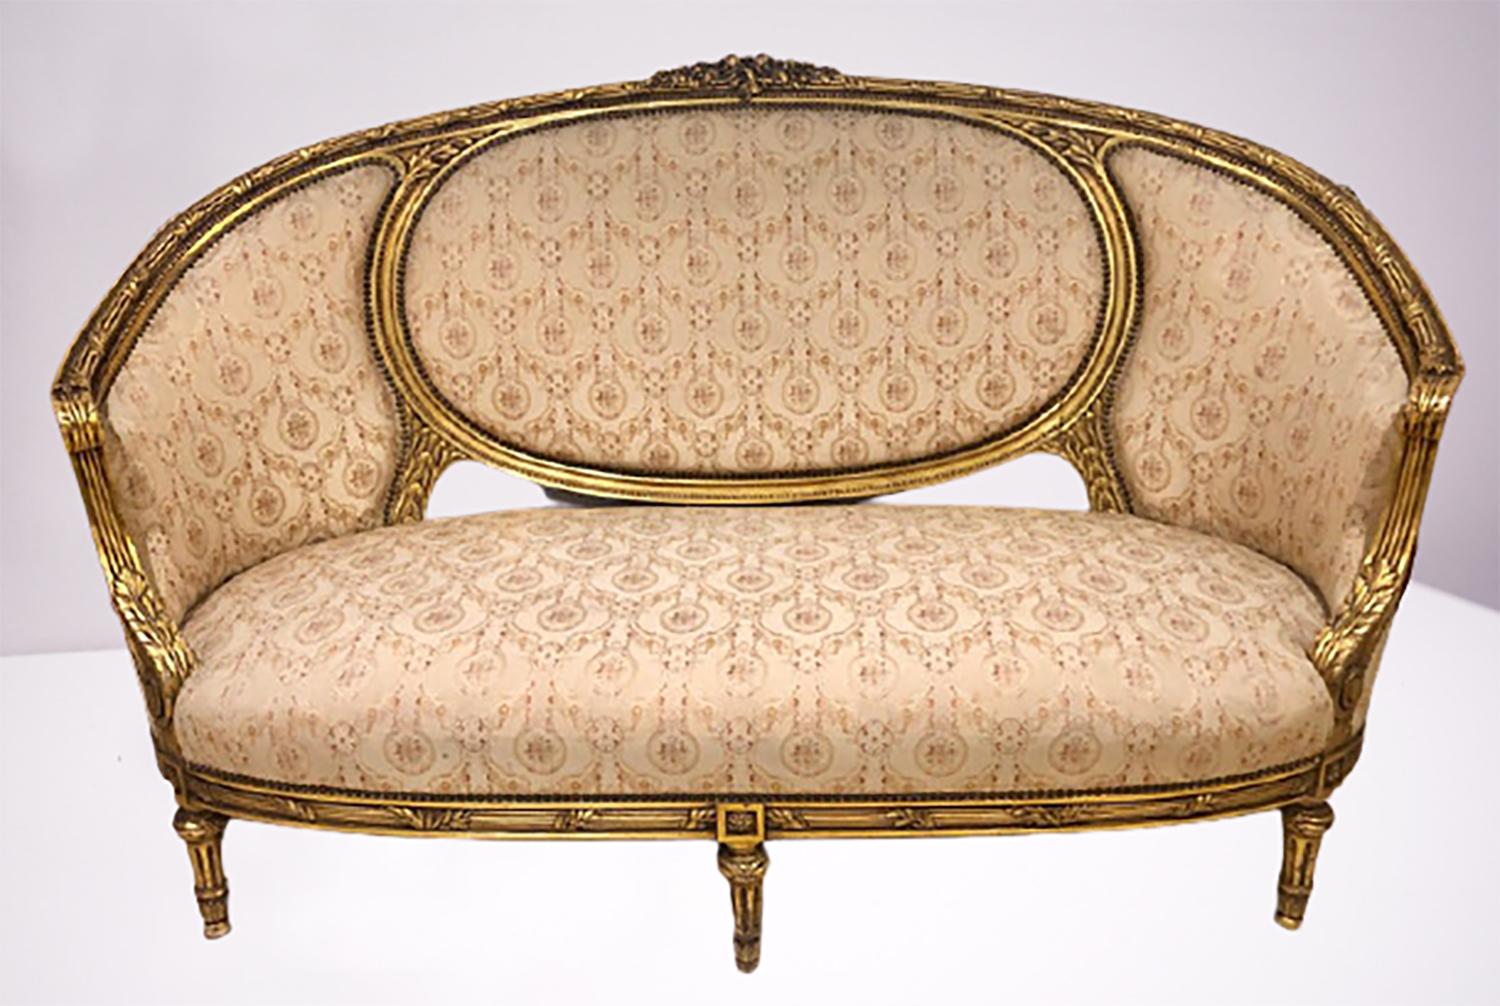 French giltwood Louis XVI style Cameo back sofa settee and pair armchairs. This is a large and impressive living room setting in a very lovely French inspired upholstery. The sleek and fine frames in a full gilt gold finish having carved leaf and